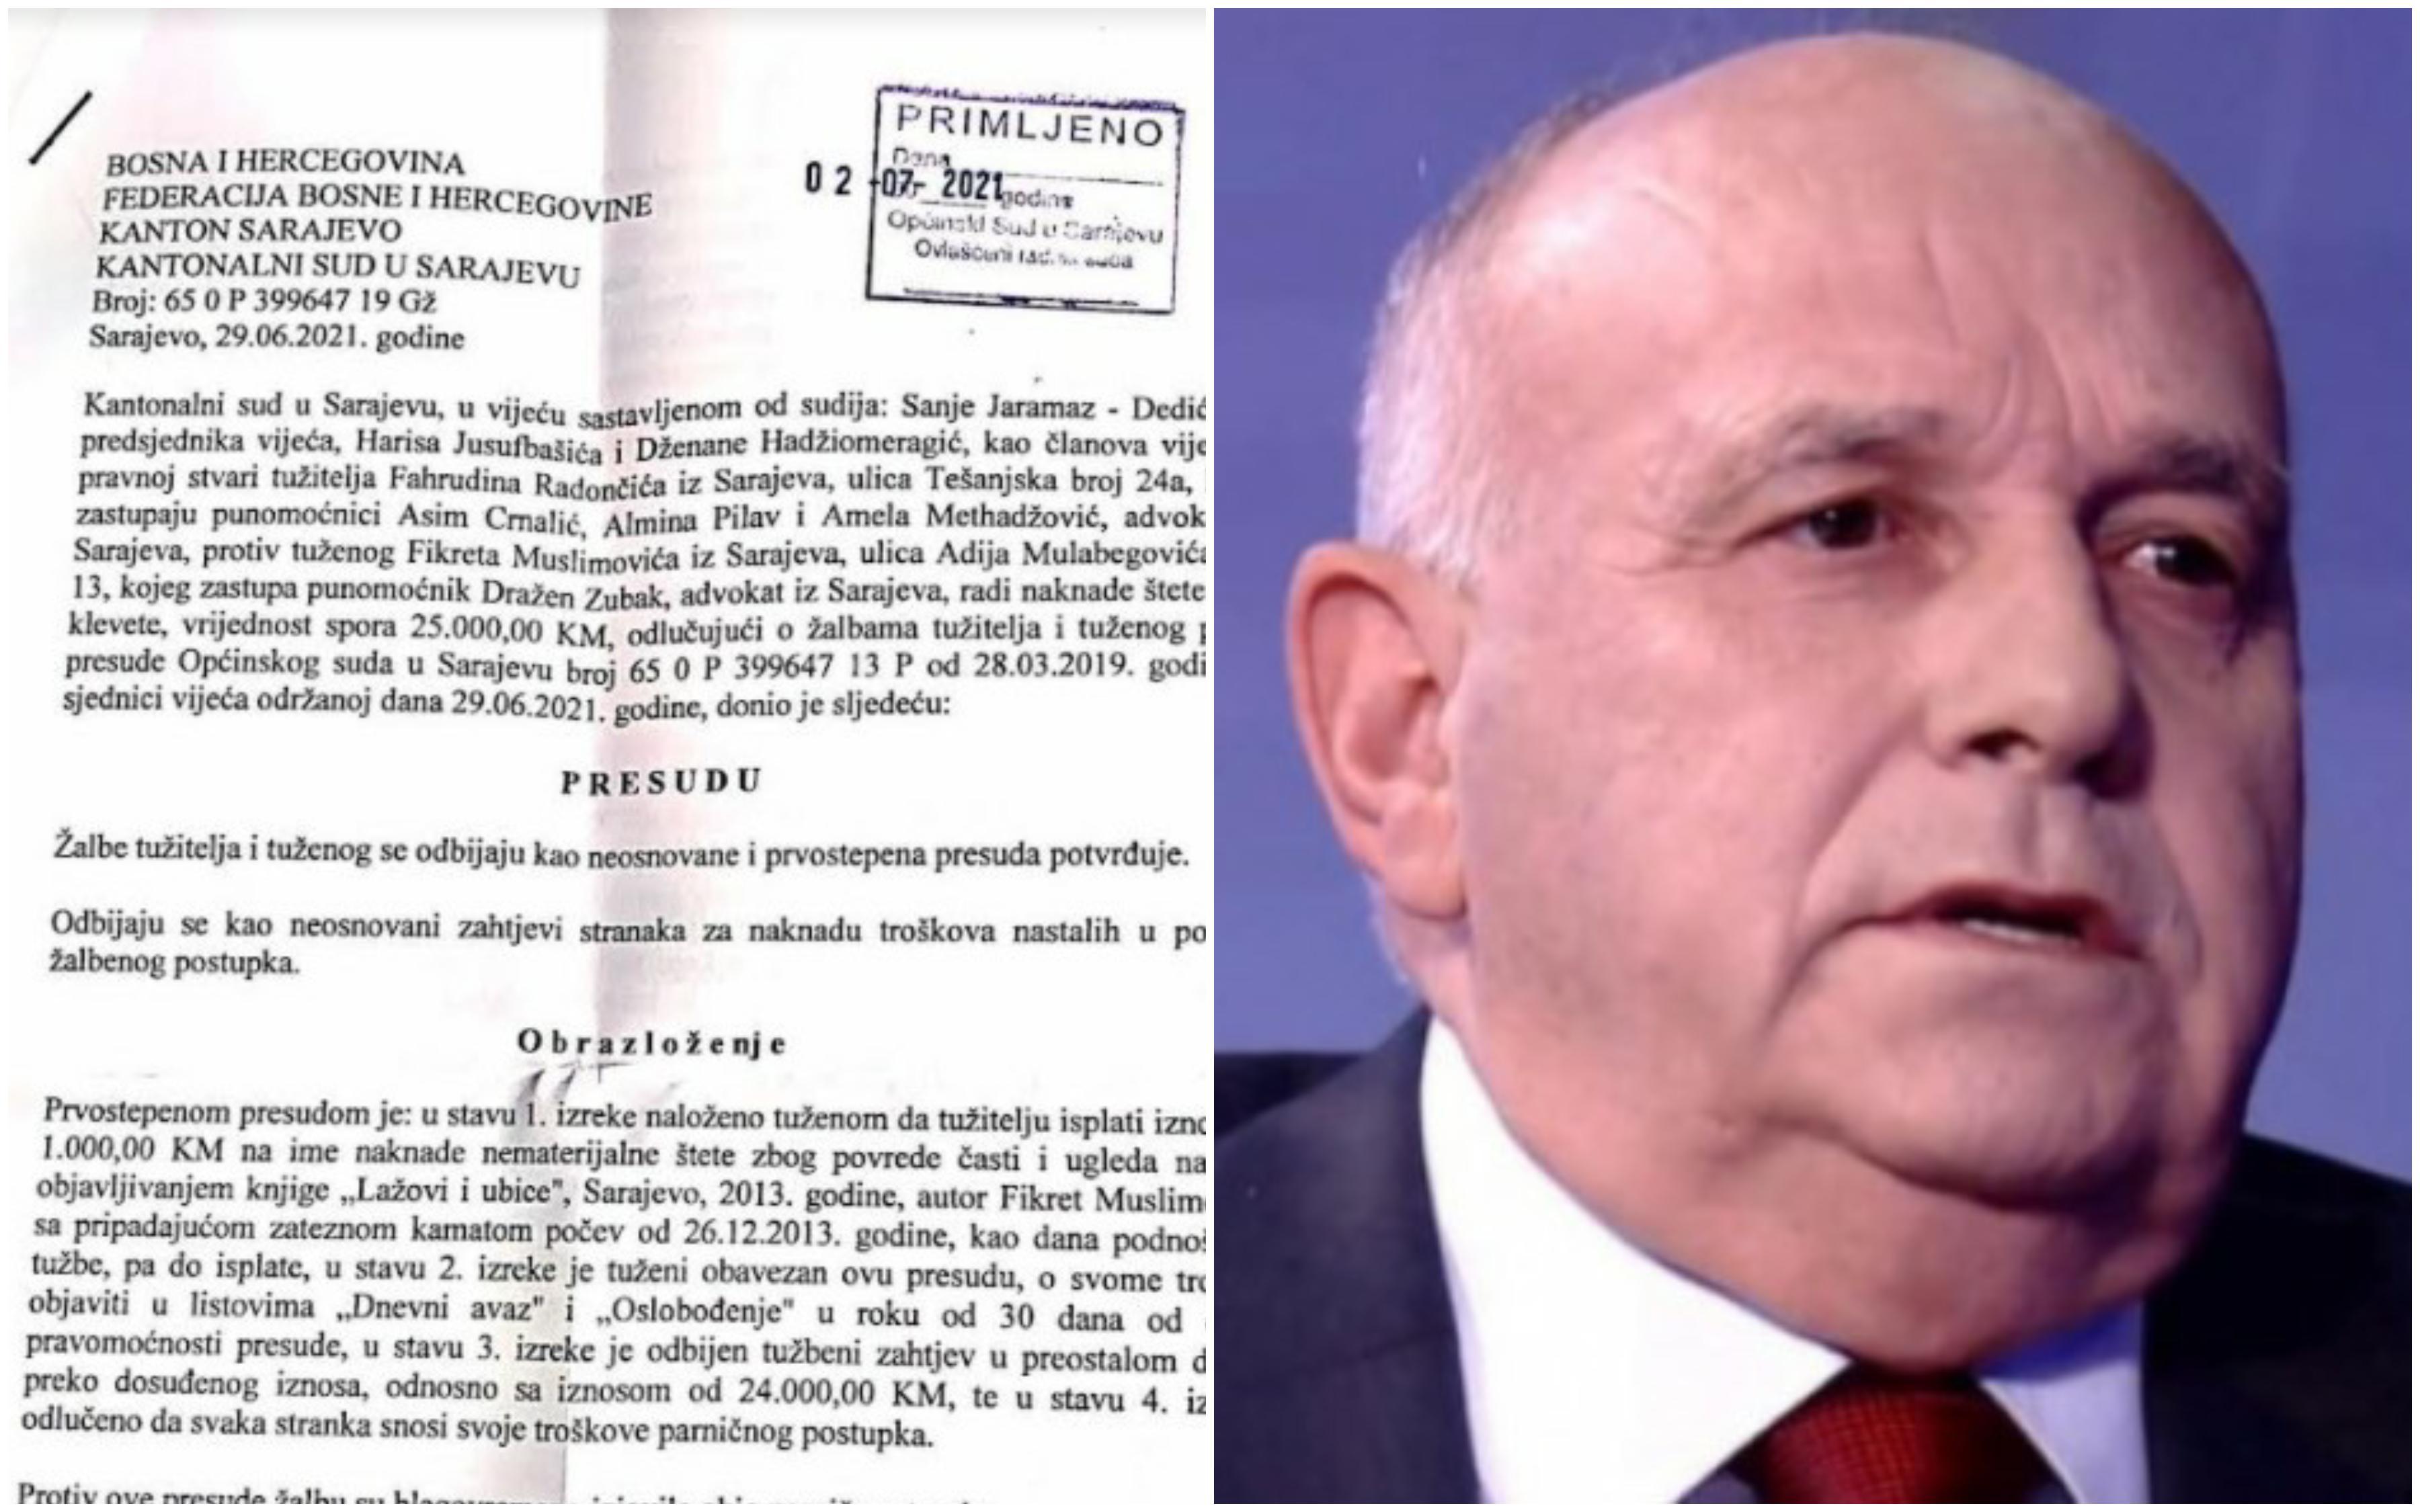 Fikret Muslimović was again convicted for numerous lies he wrote about Fahrudin Radončić